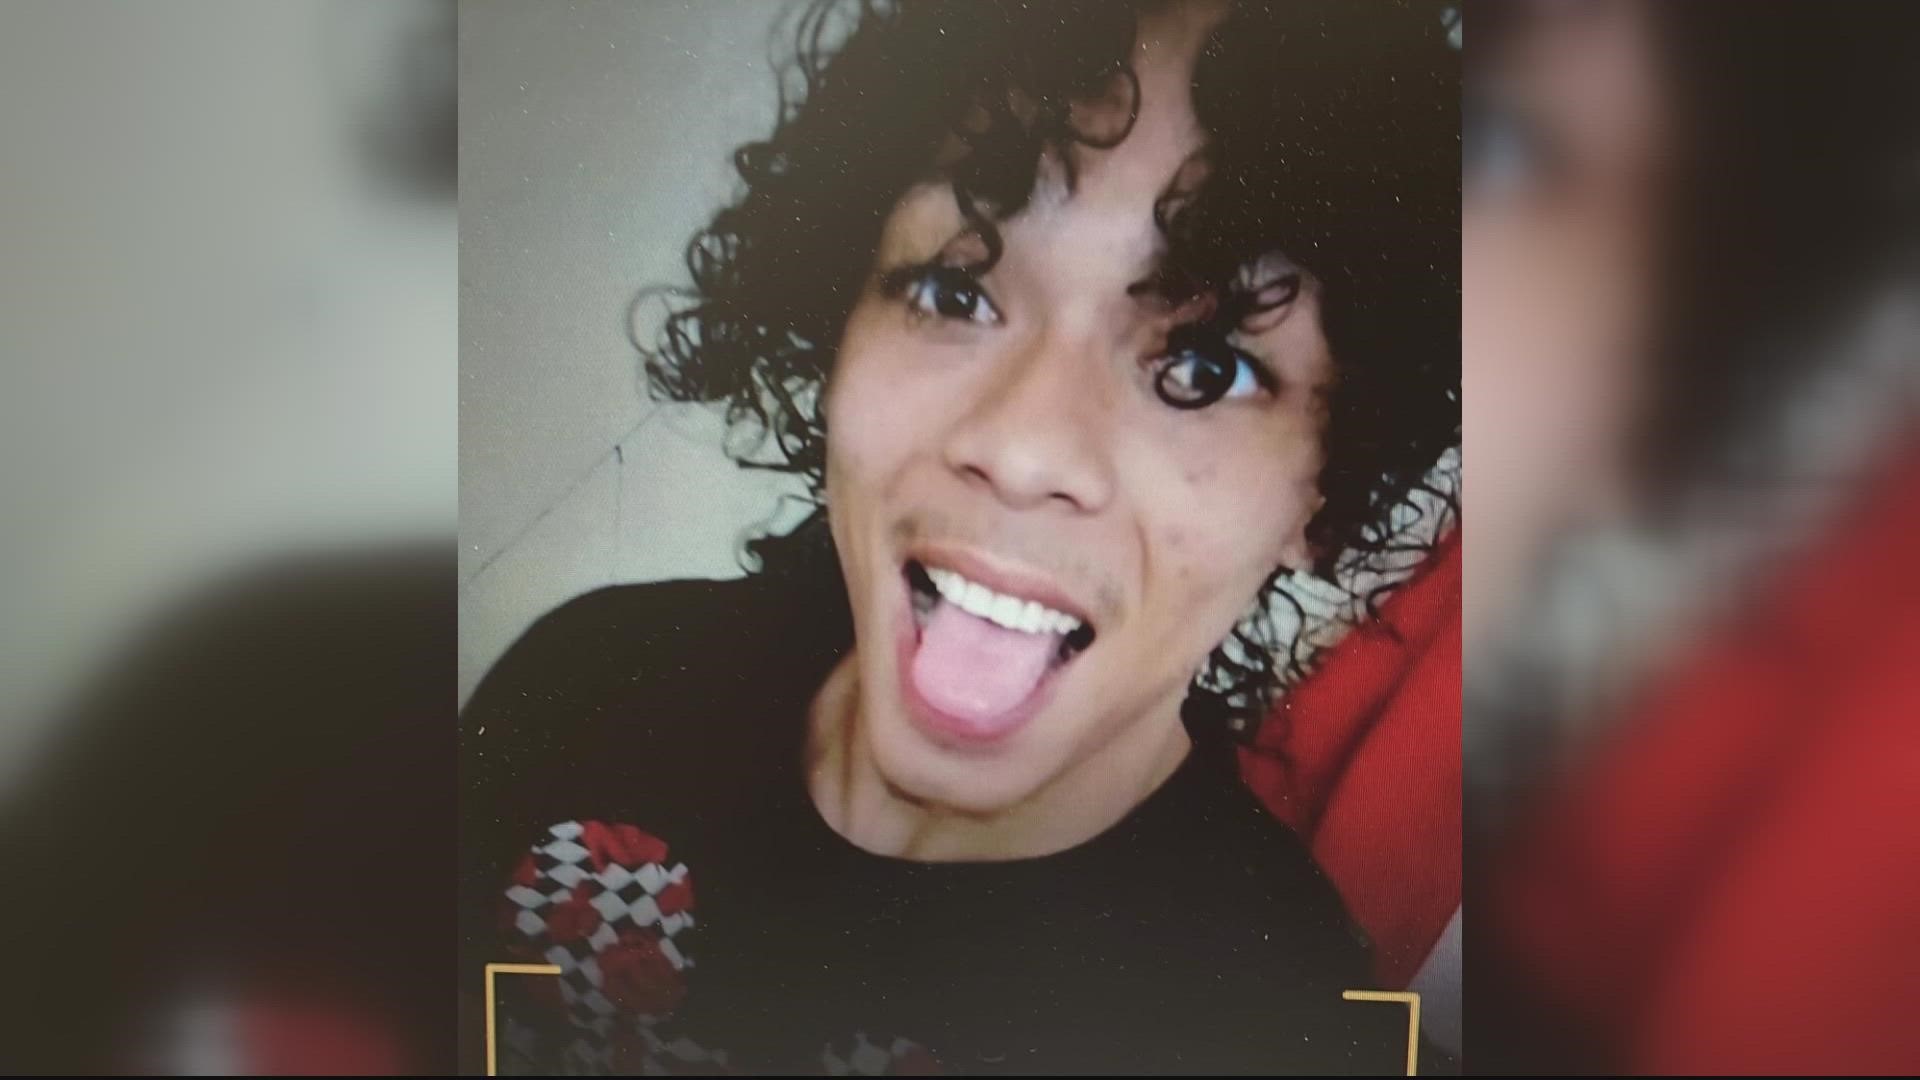 Montgomery County Police Department is looking for William Pavon Hancock who was last seen April 10. His mother Roselyn Hancock spoke to WUSA9.